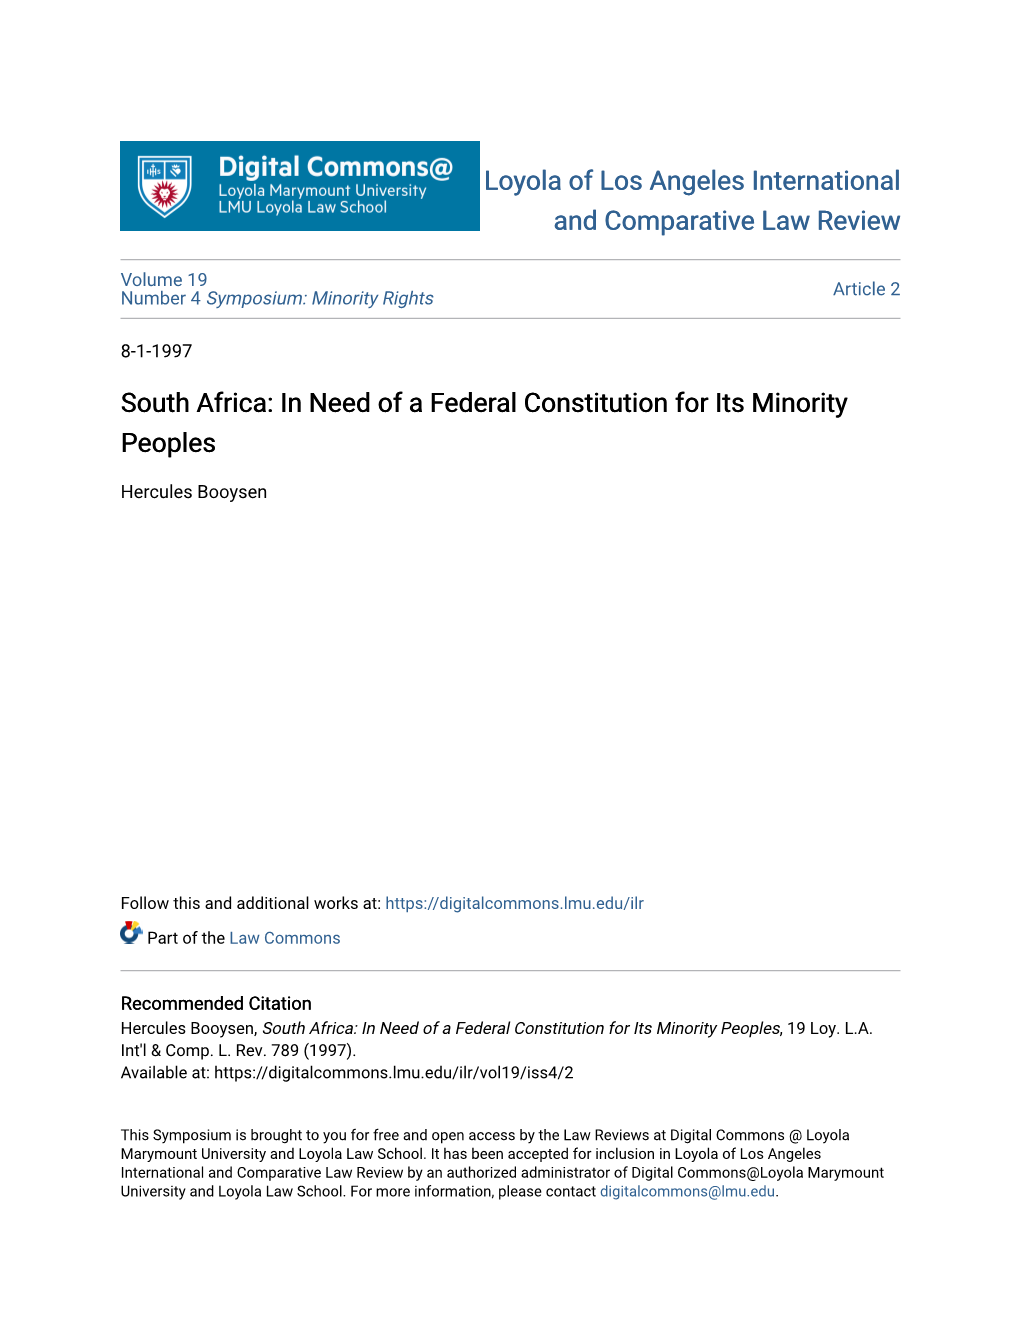 South Africa: in Need of a Federal Constitution for Its Minority Peoples